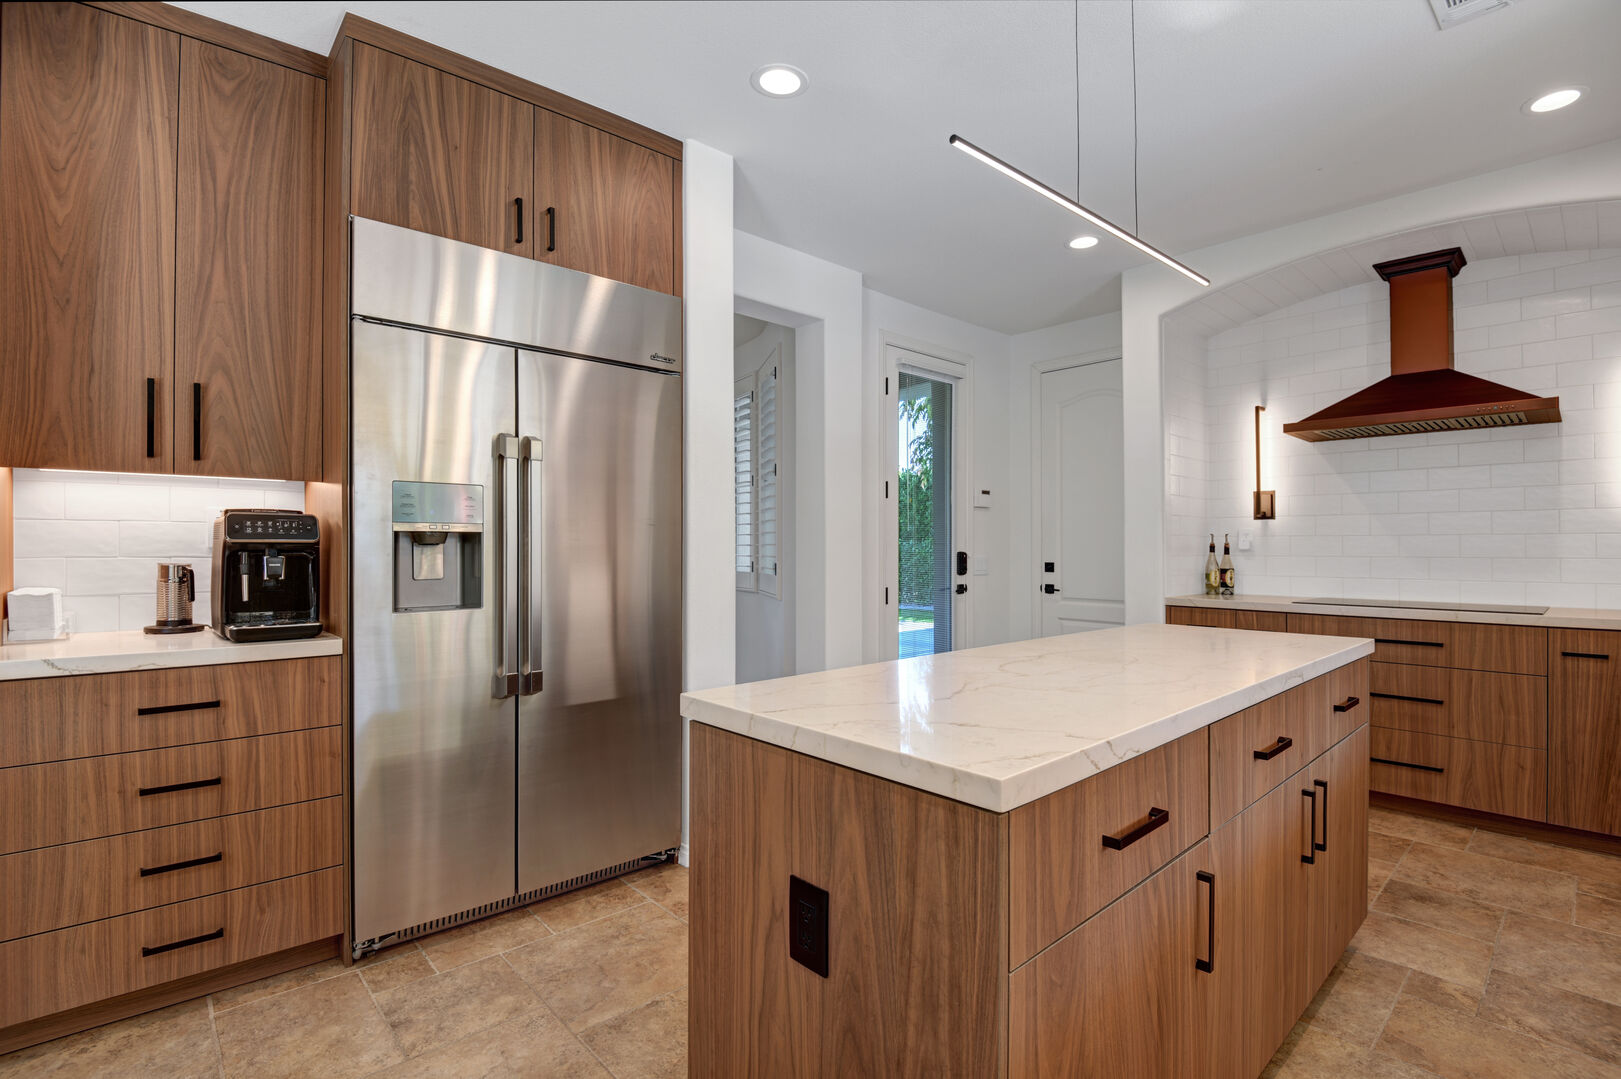 Experience culinary luxury with the large side-by-side fridge and ample counter space in the modern kitchen.